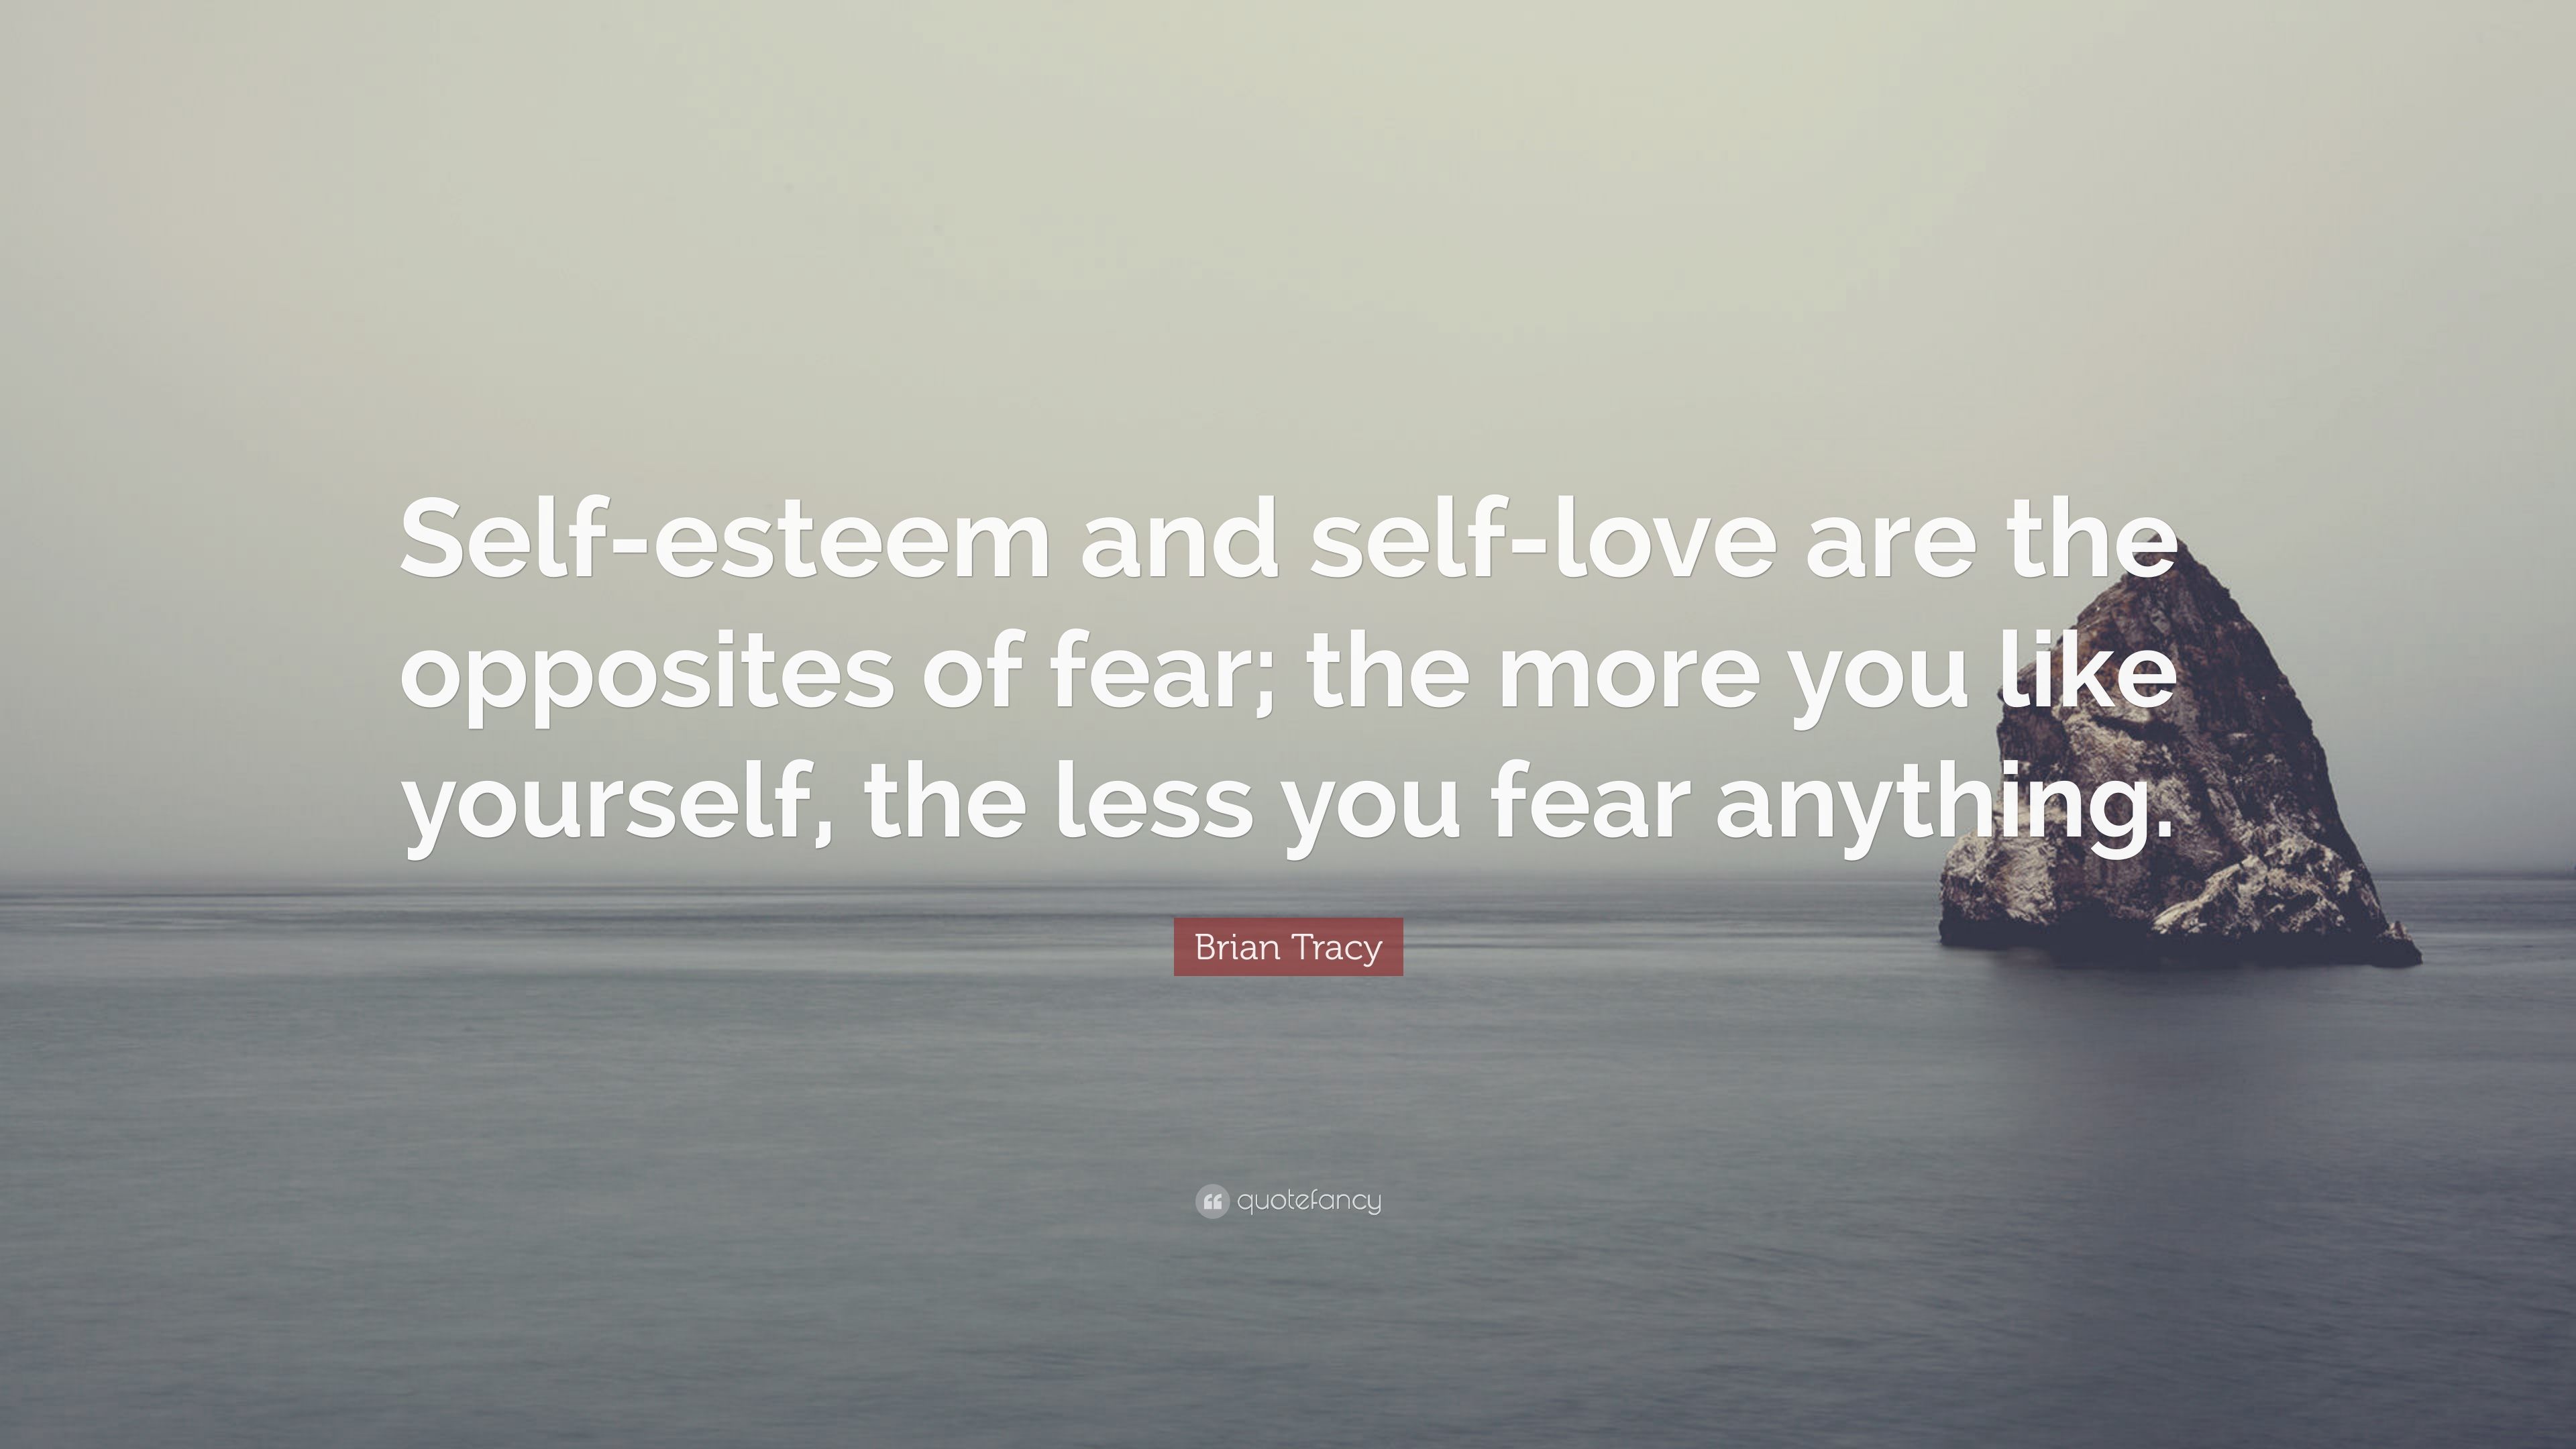 Brian Tracy Quote: “Self Esteem And Self Love Are The Opposites Of Fear; The More You Like Yourself, The Less You Fear Anything.” (12 Wallpaper)